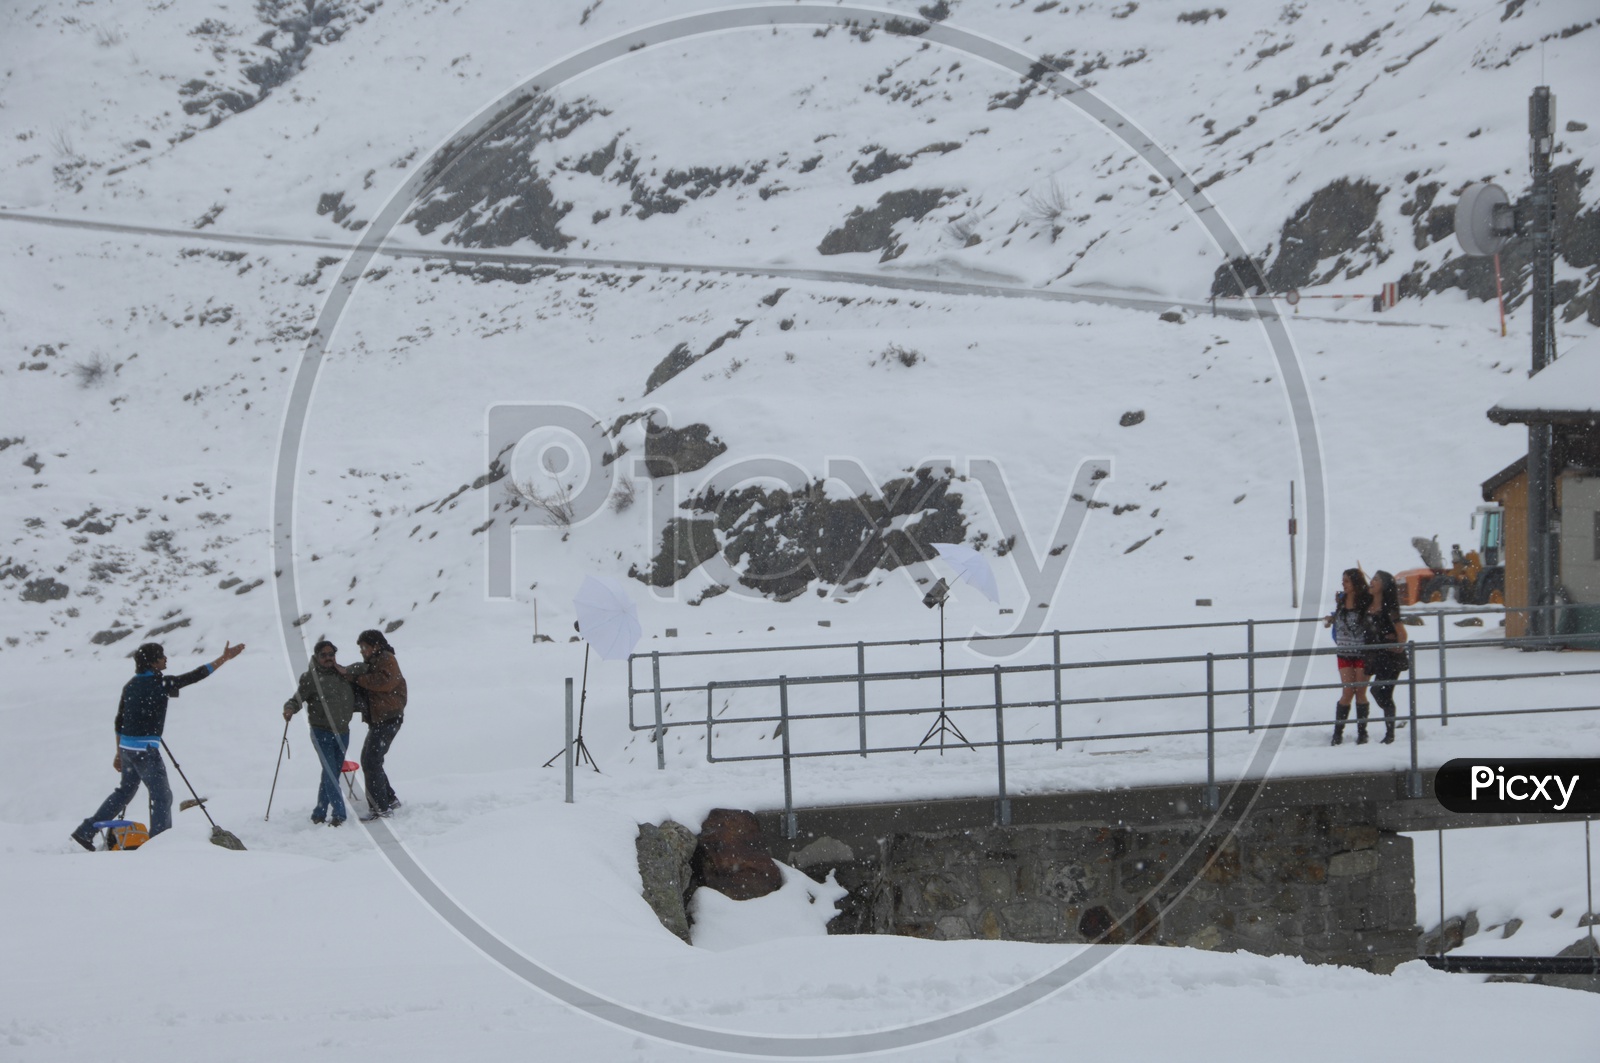 Film Crew Shooting In Snow filled Mountains In Switzerland